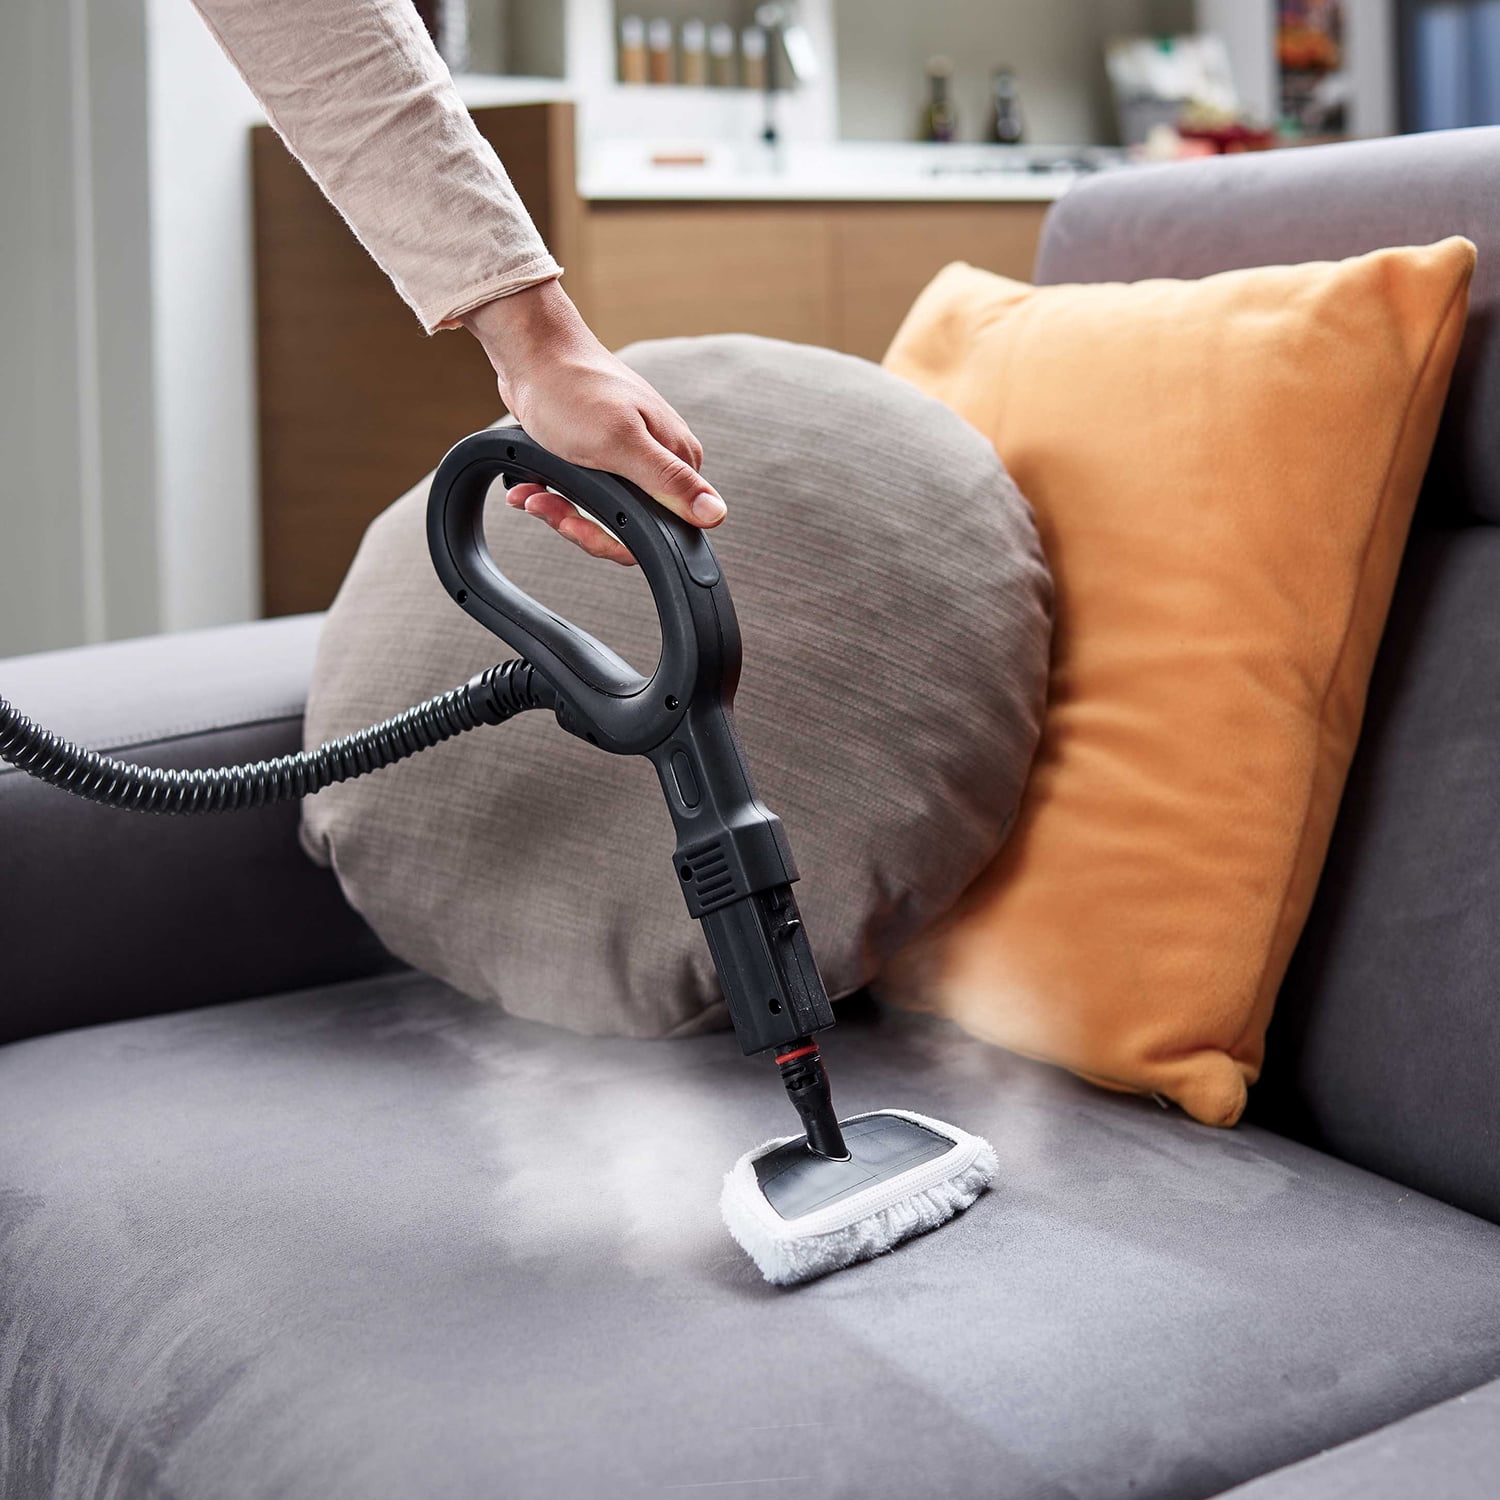 POLTI Smart Mop Steam Cleaner for Home Use with 12 Attachments - Works for  Tile Floor with Grout, Carpet, Hardwood & Furniture Upholstery